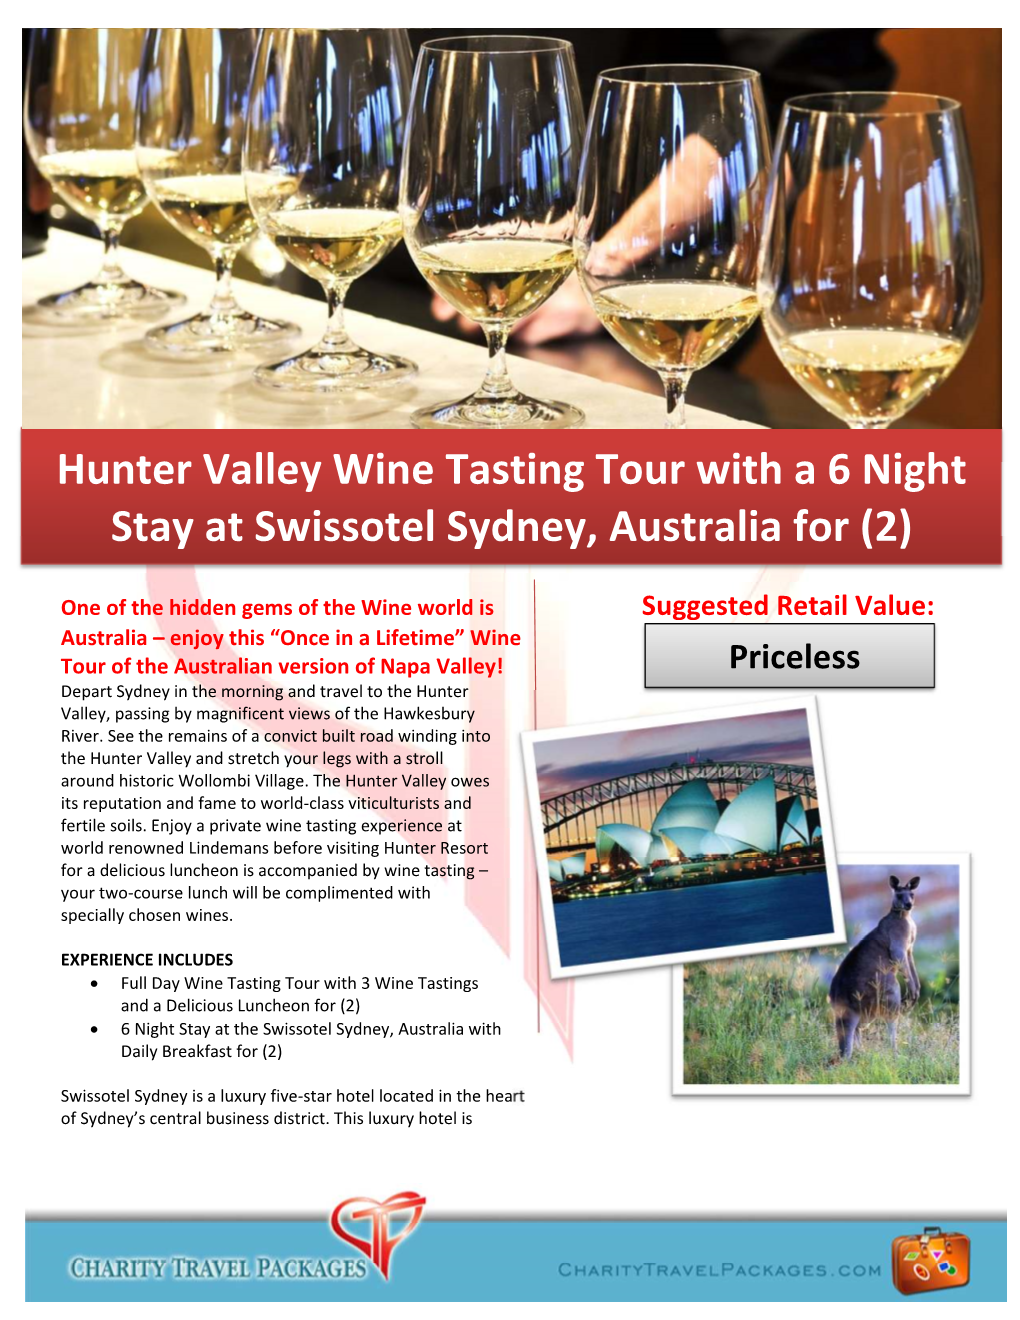 Hunter Valley Wine Tasting Tour with a 6 Night Stay at Swissotel